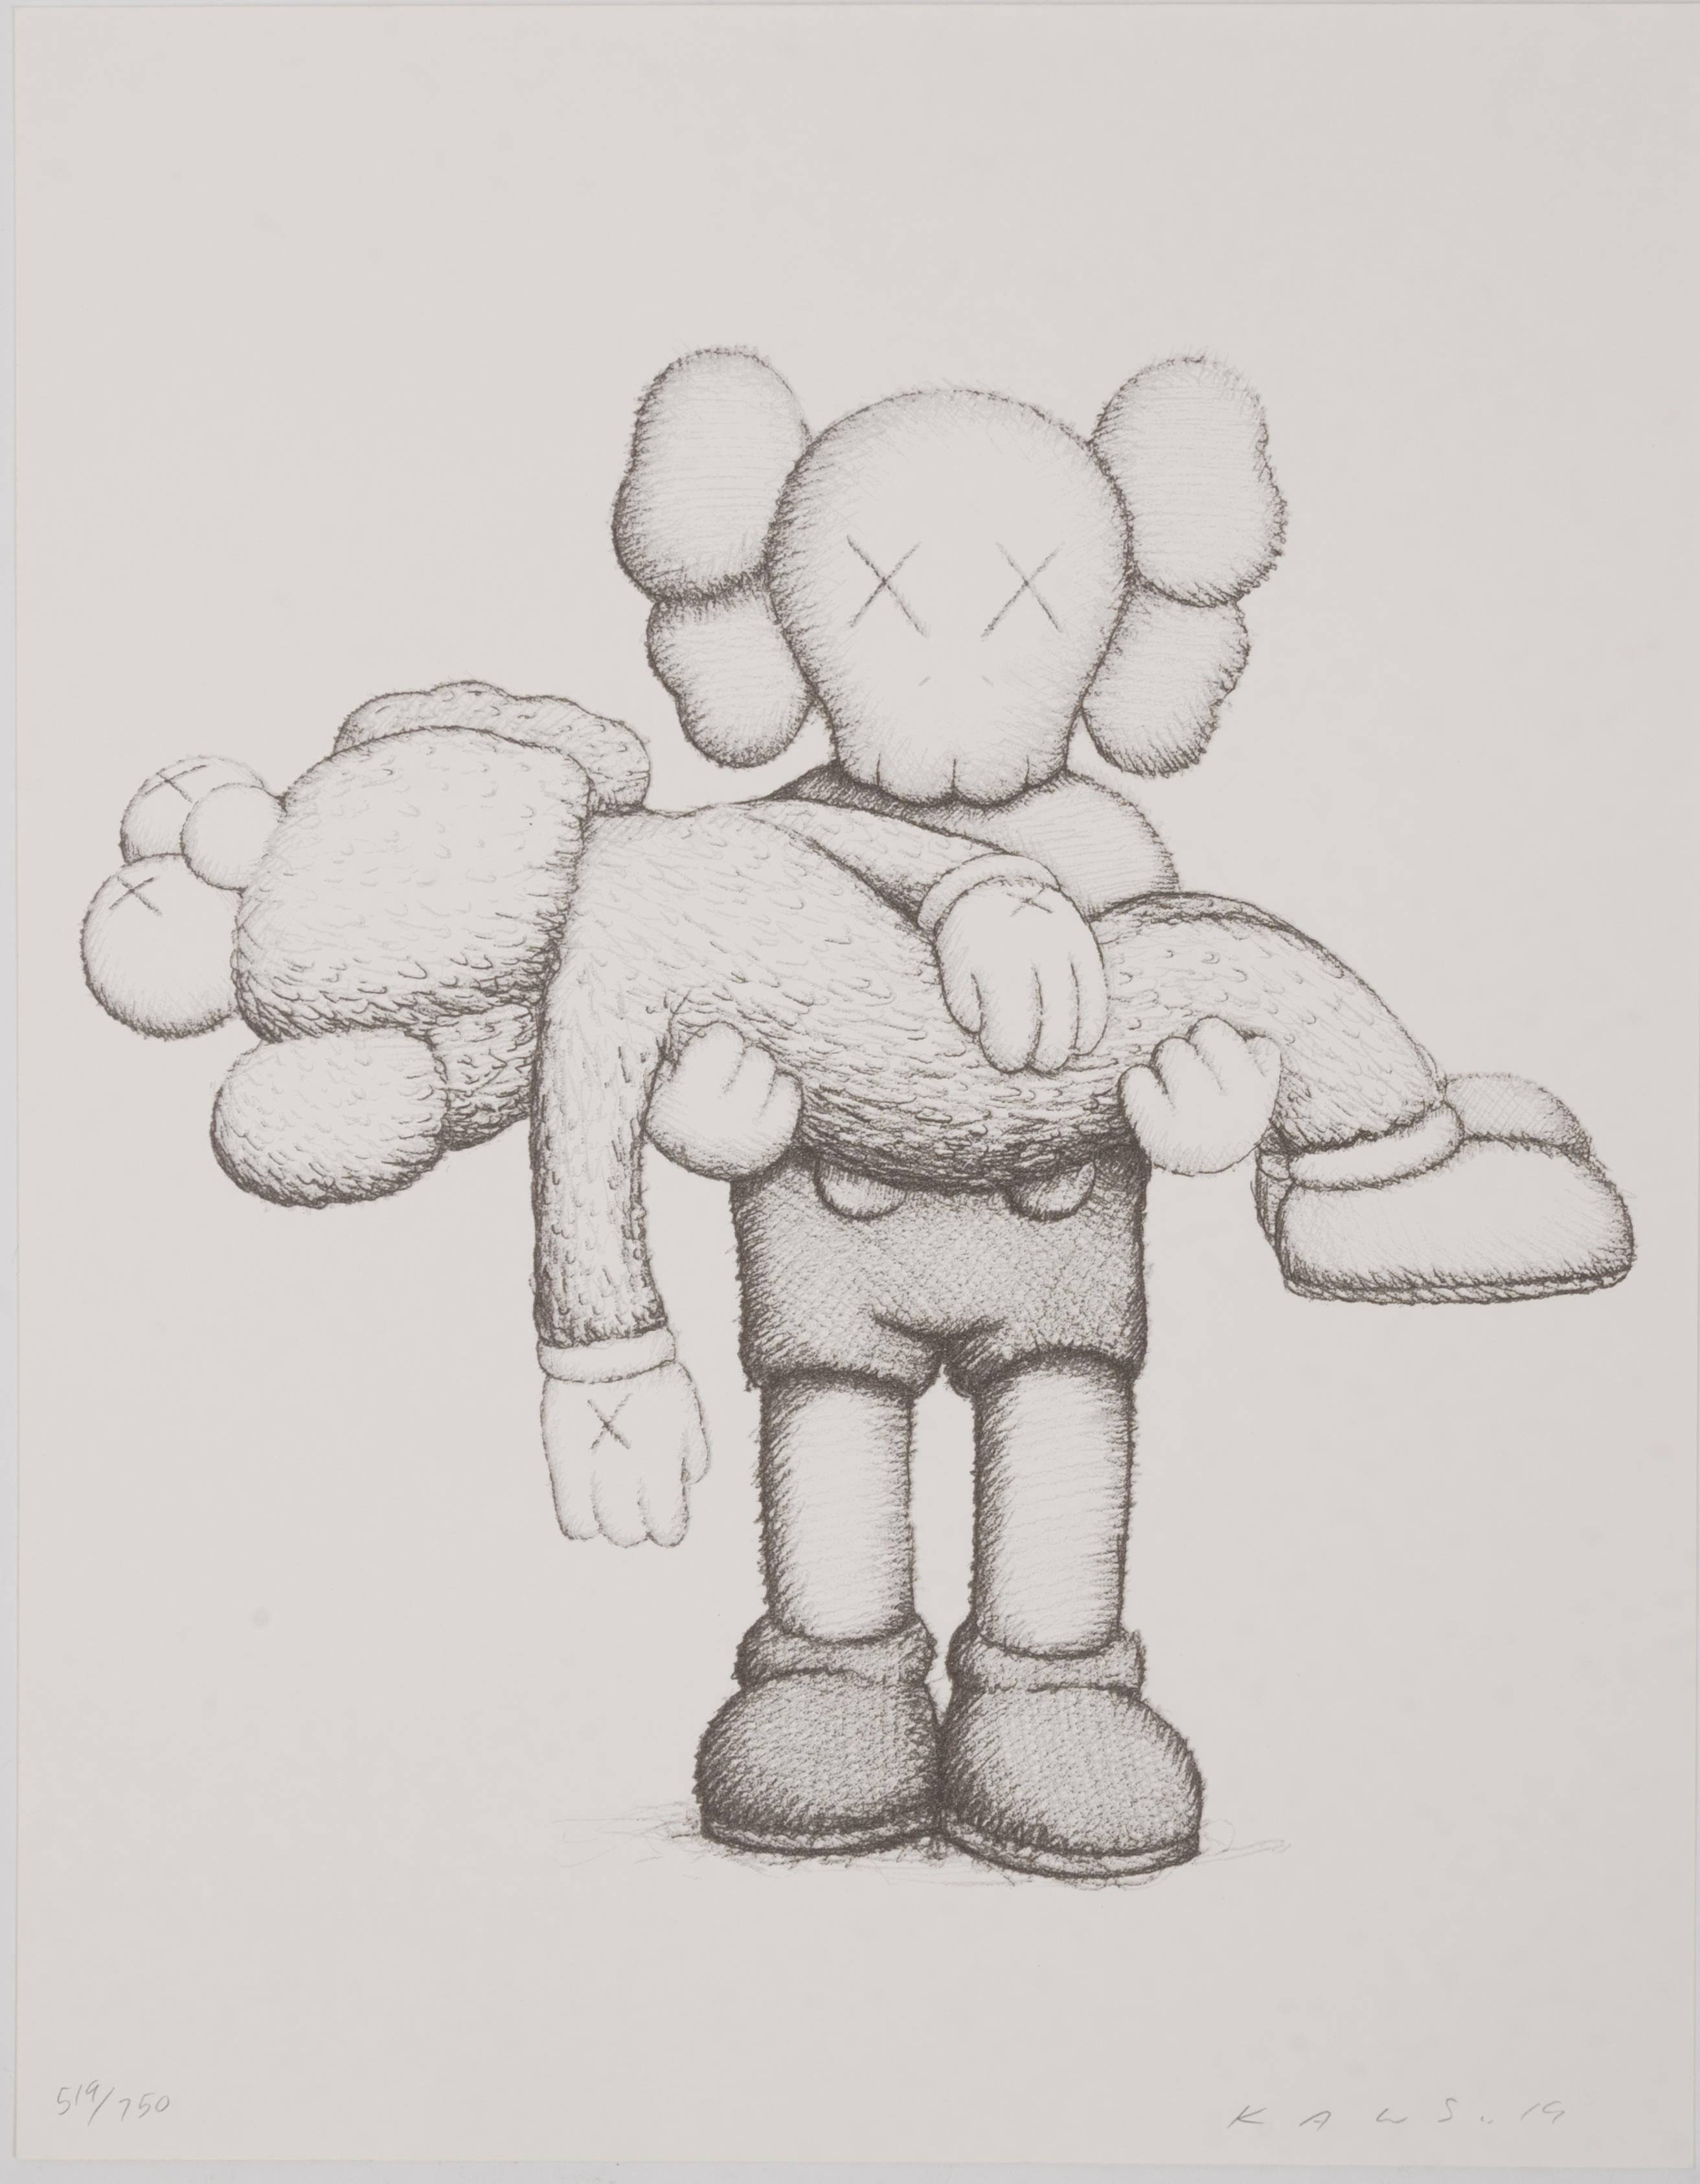 Original book and print by Kaws: Companionship in the age of loneliness - Print by KAWS